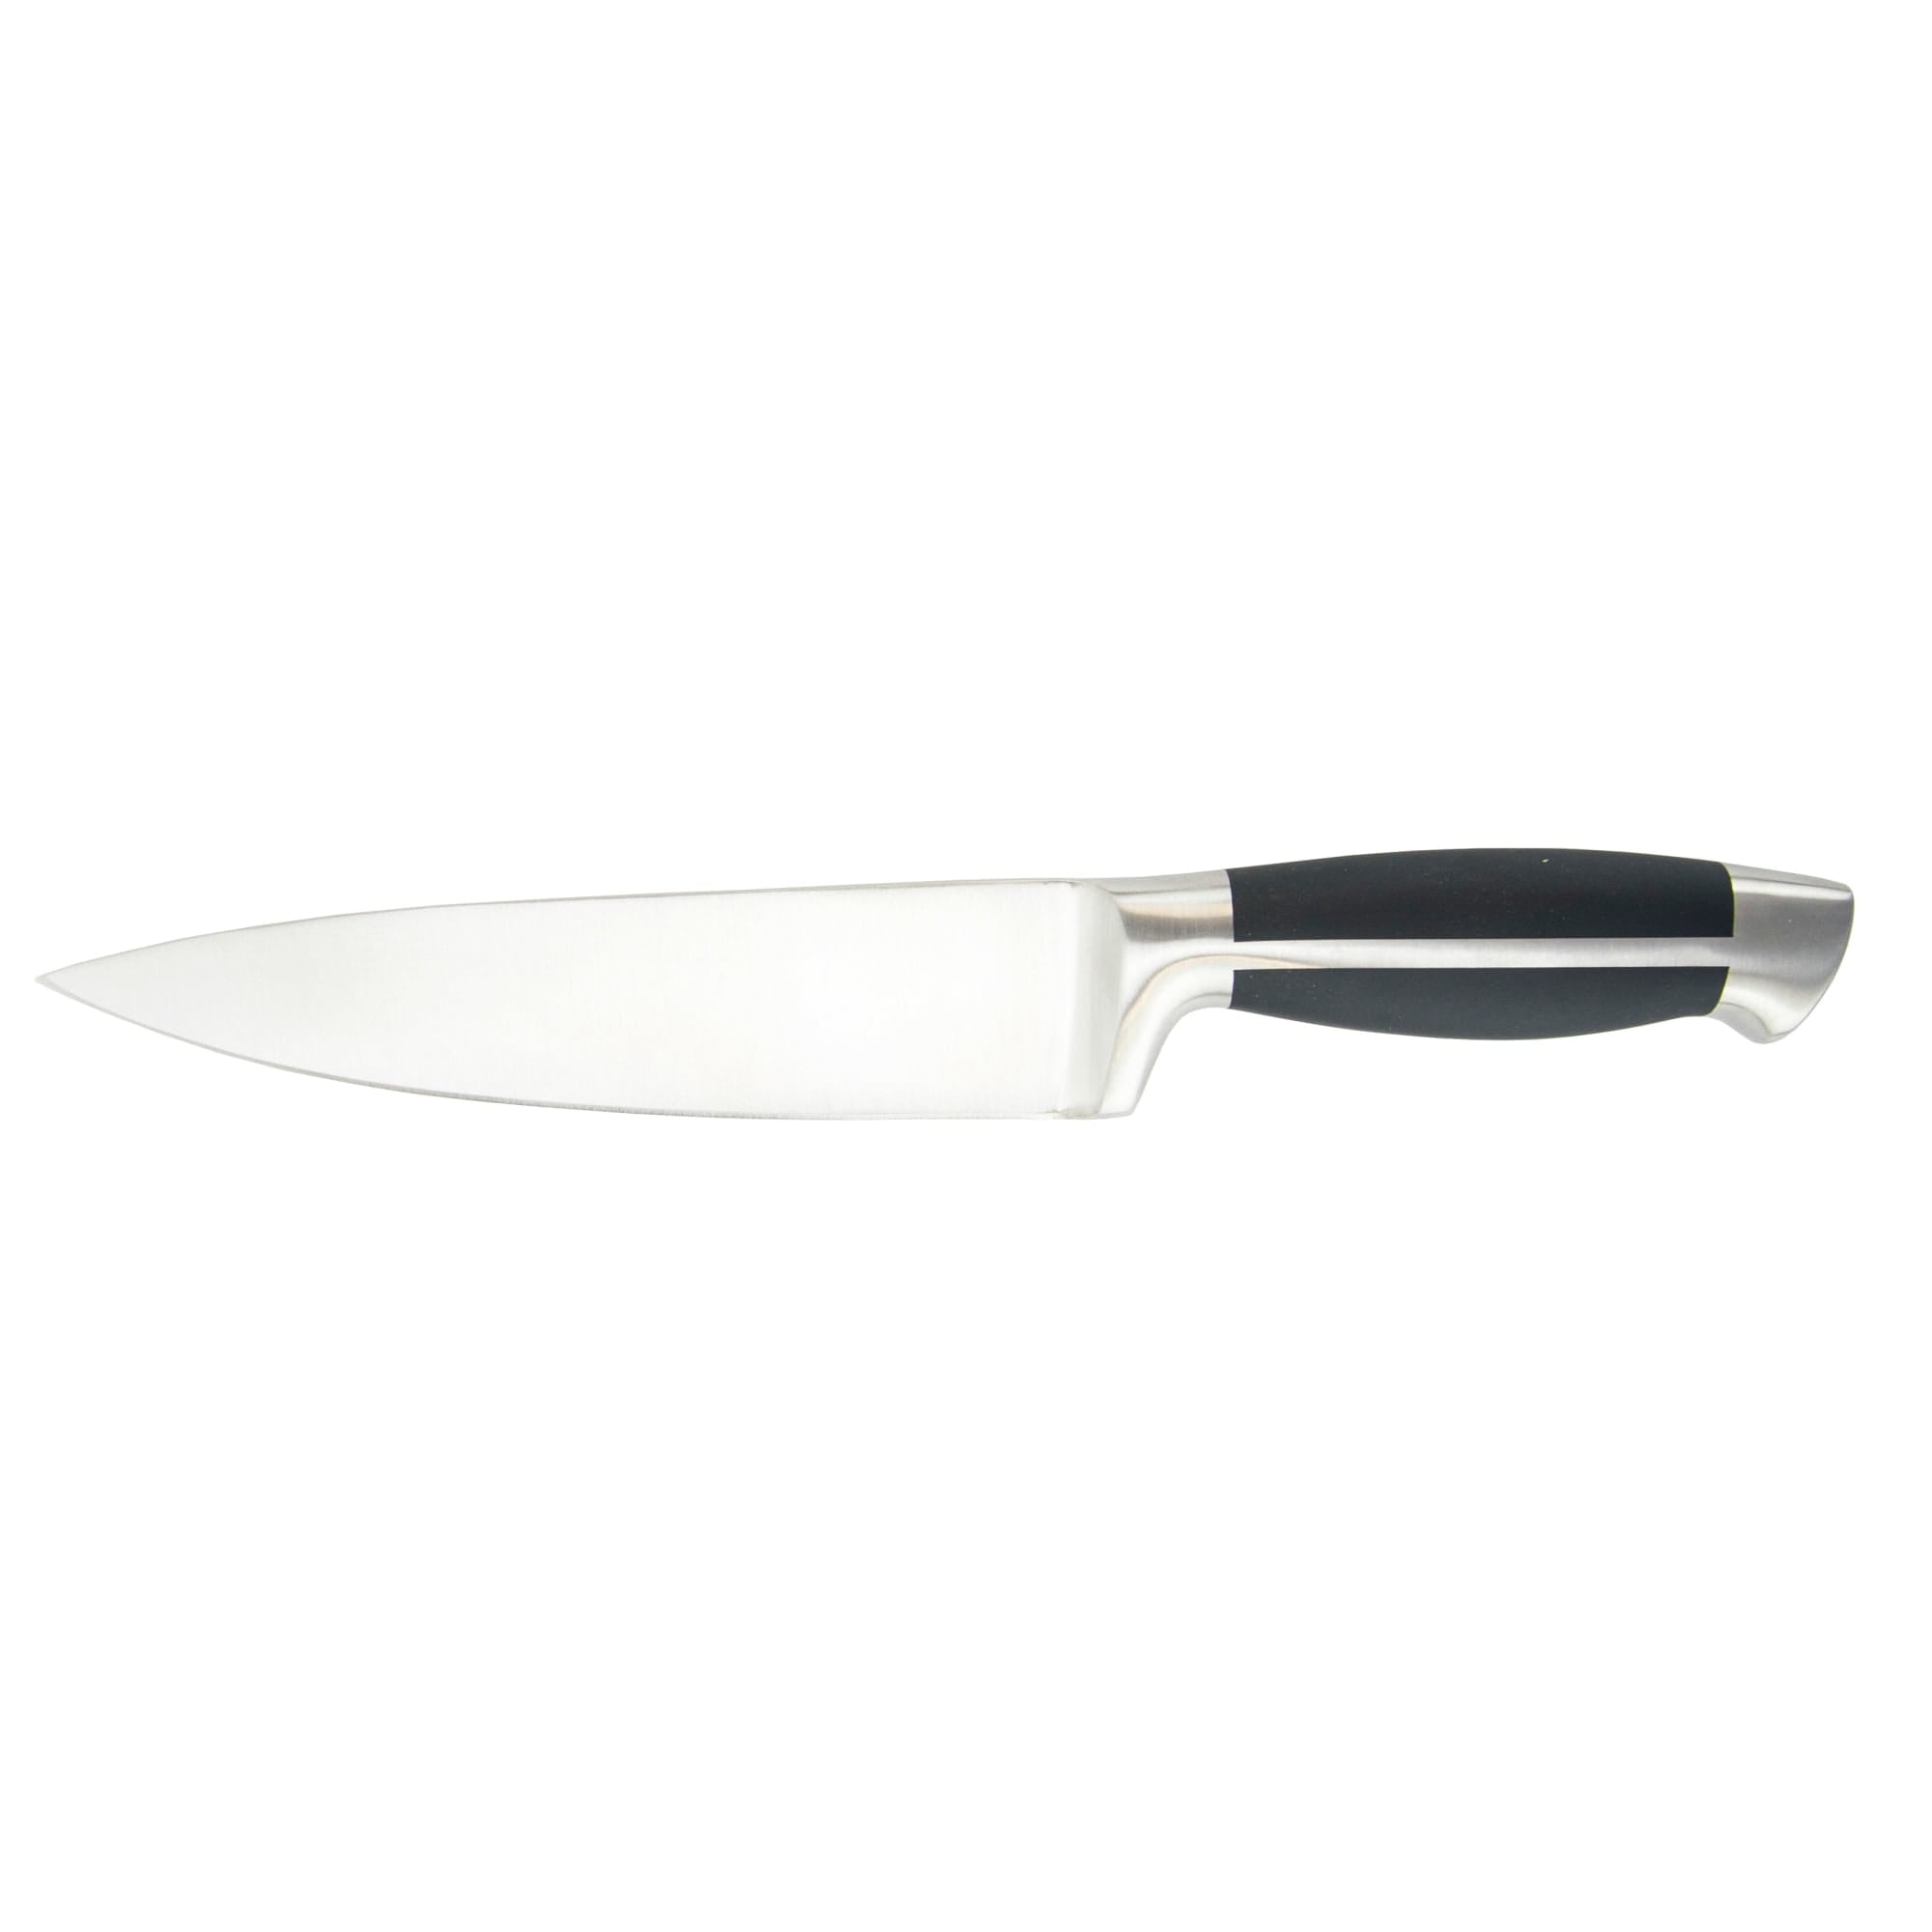 Home Basics Continental Collection 6" Chef Knife $5.00 EACH, CASE PACK OF 24